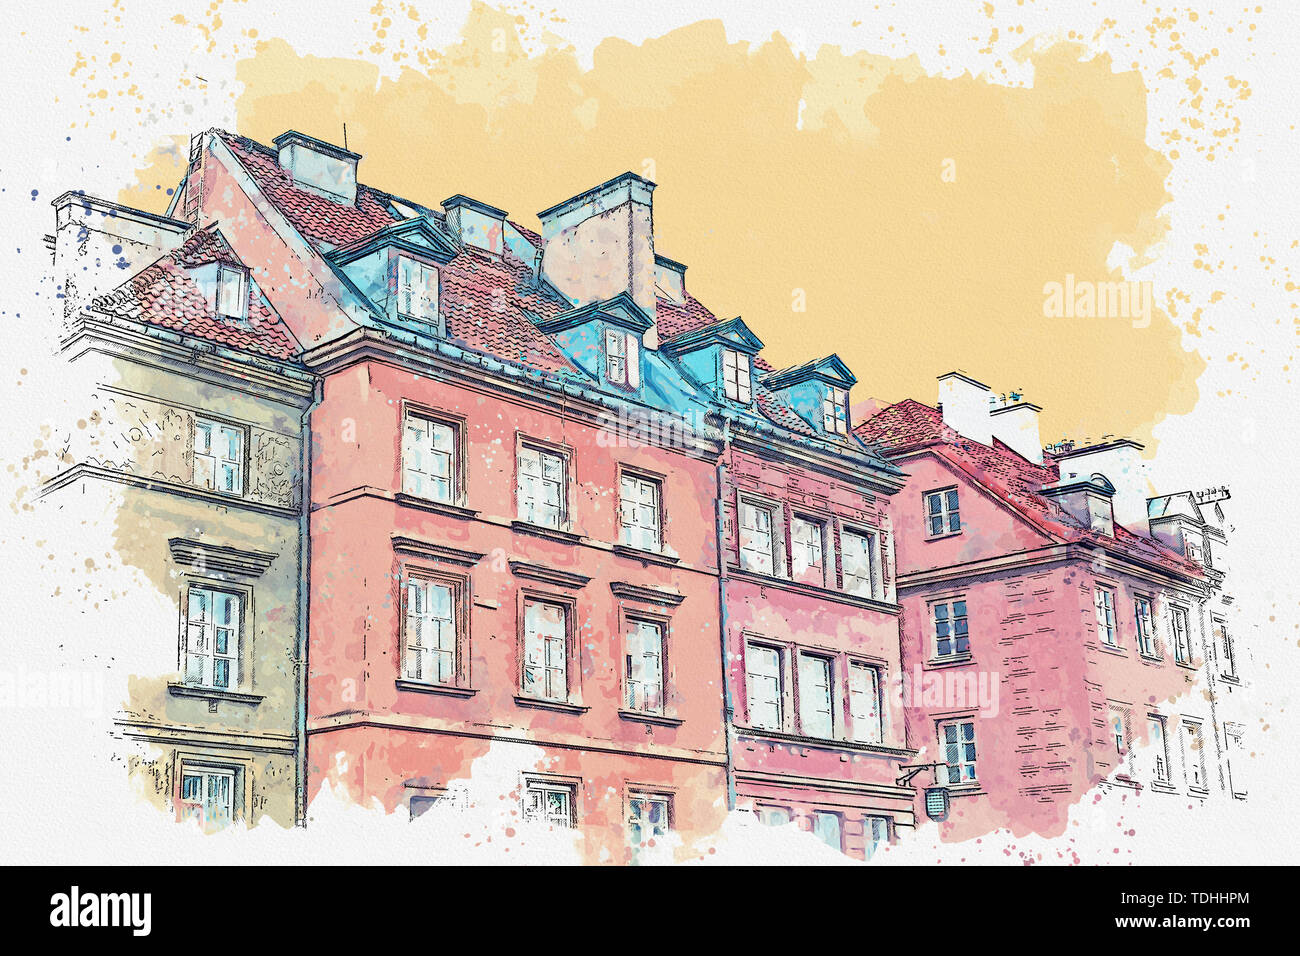 68,674 Line Drawings Apartment Building Stock Vectors and Vector Art |  Shutterstock